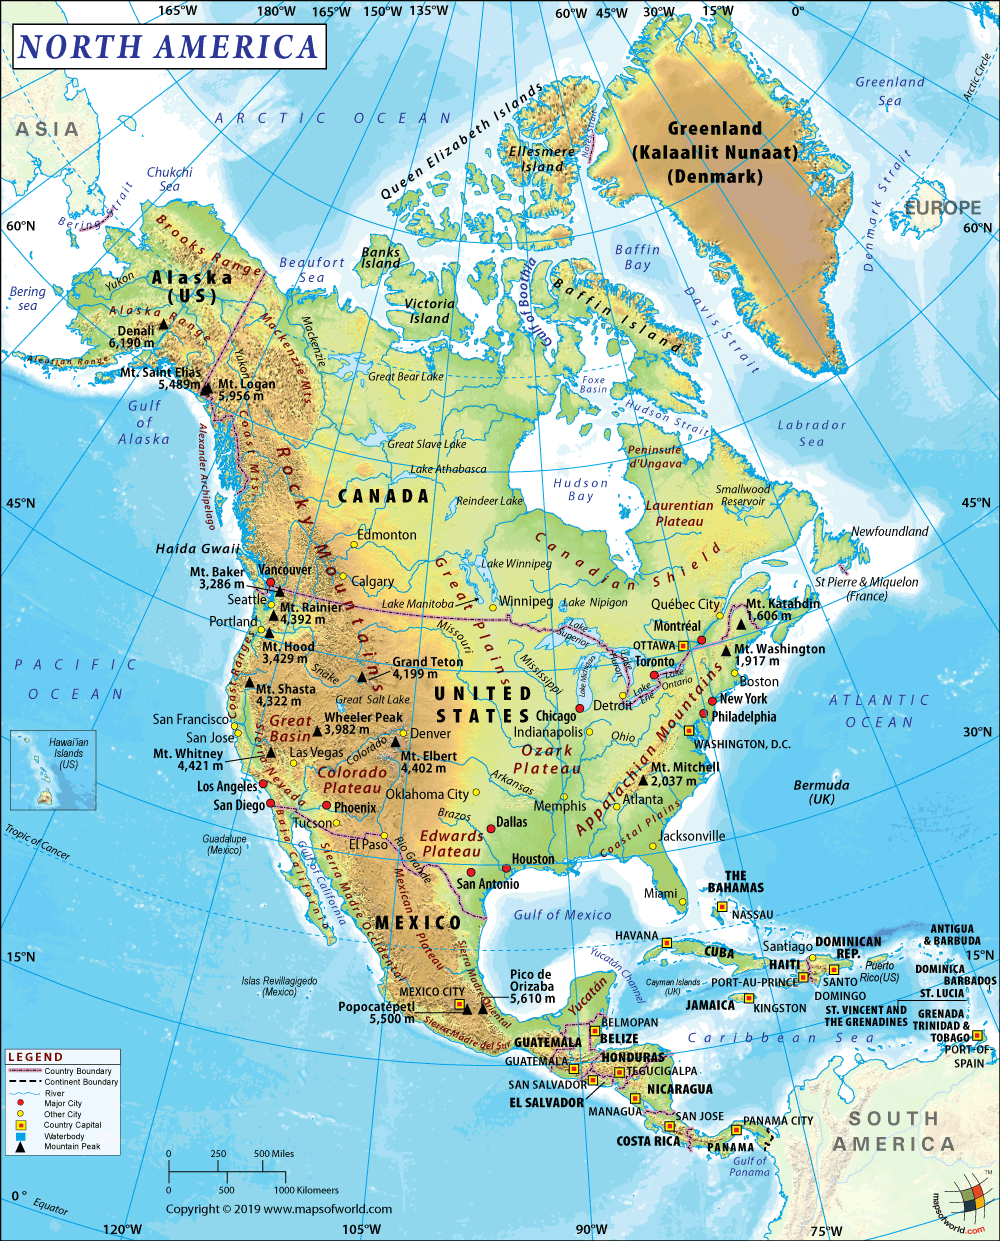 How Many Countries Are There In North America?